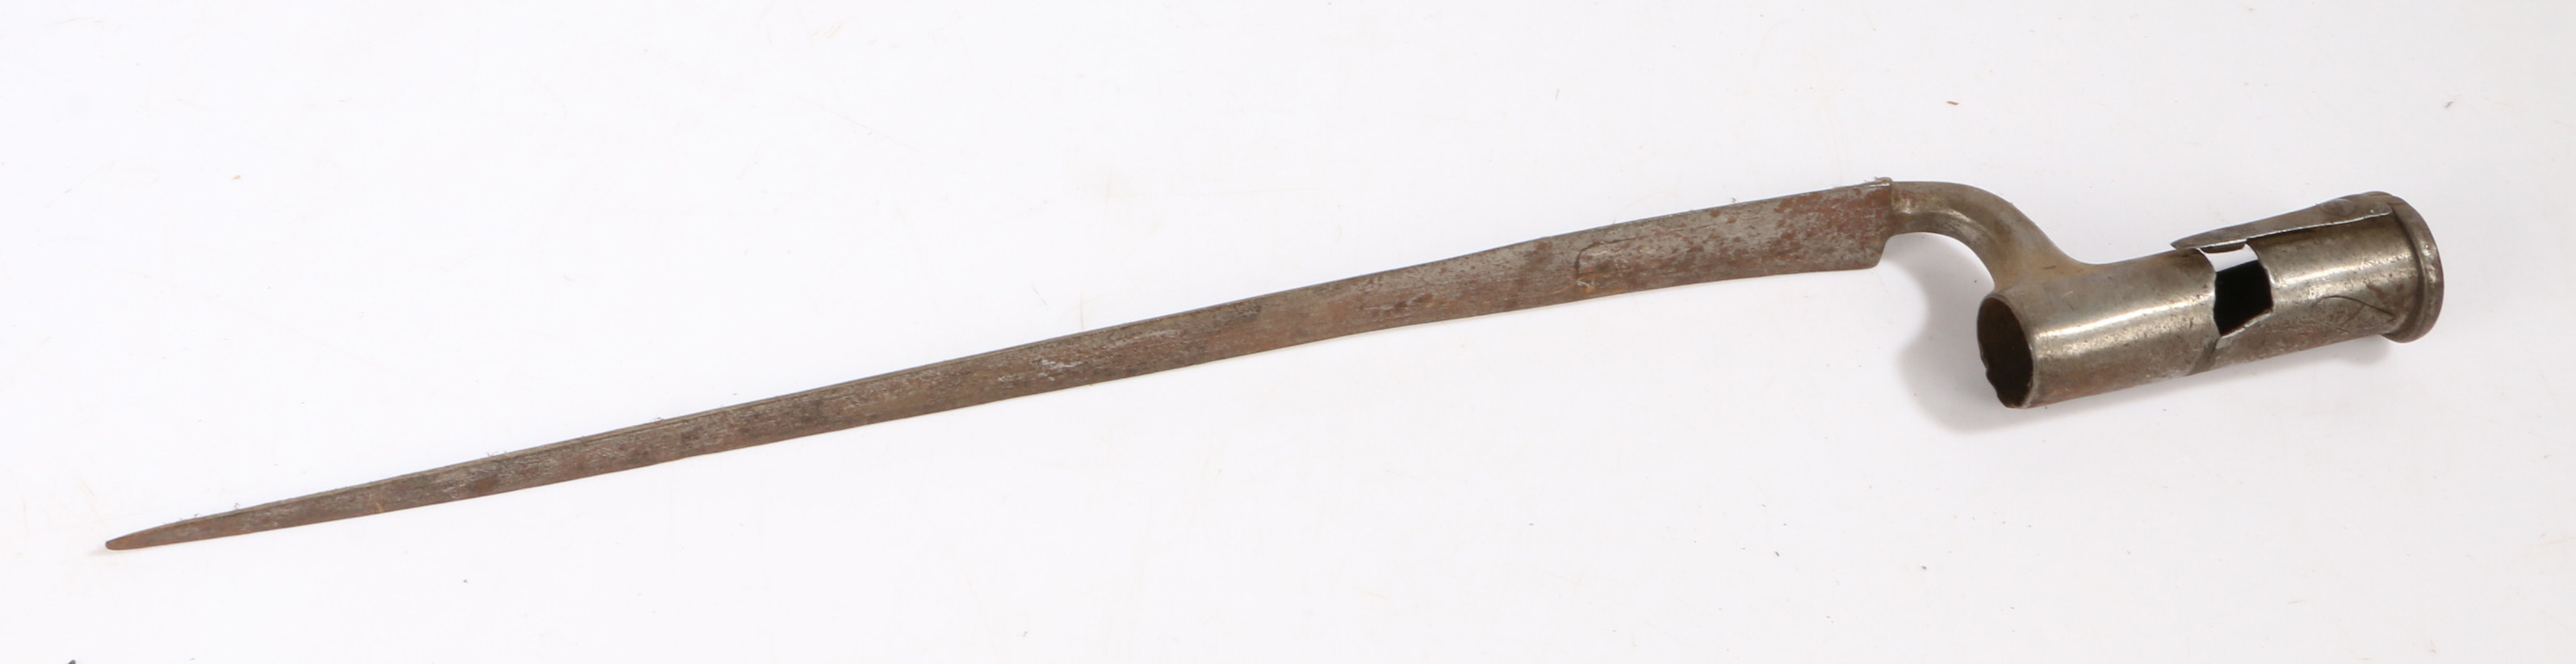 Late 18th century Brown Bess Socket Bayonet with East India Company Quartered Heart marking to